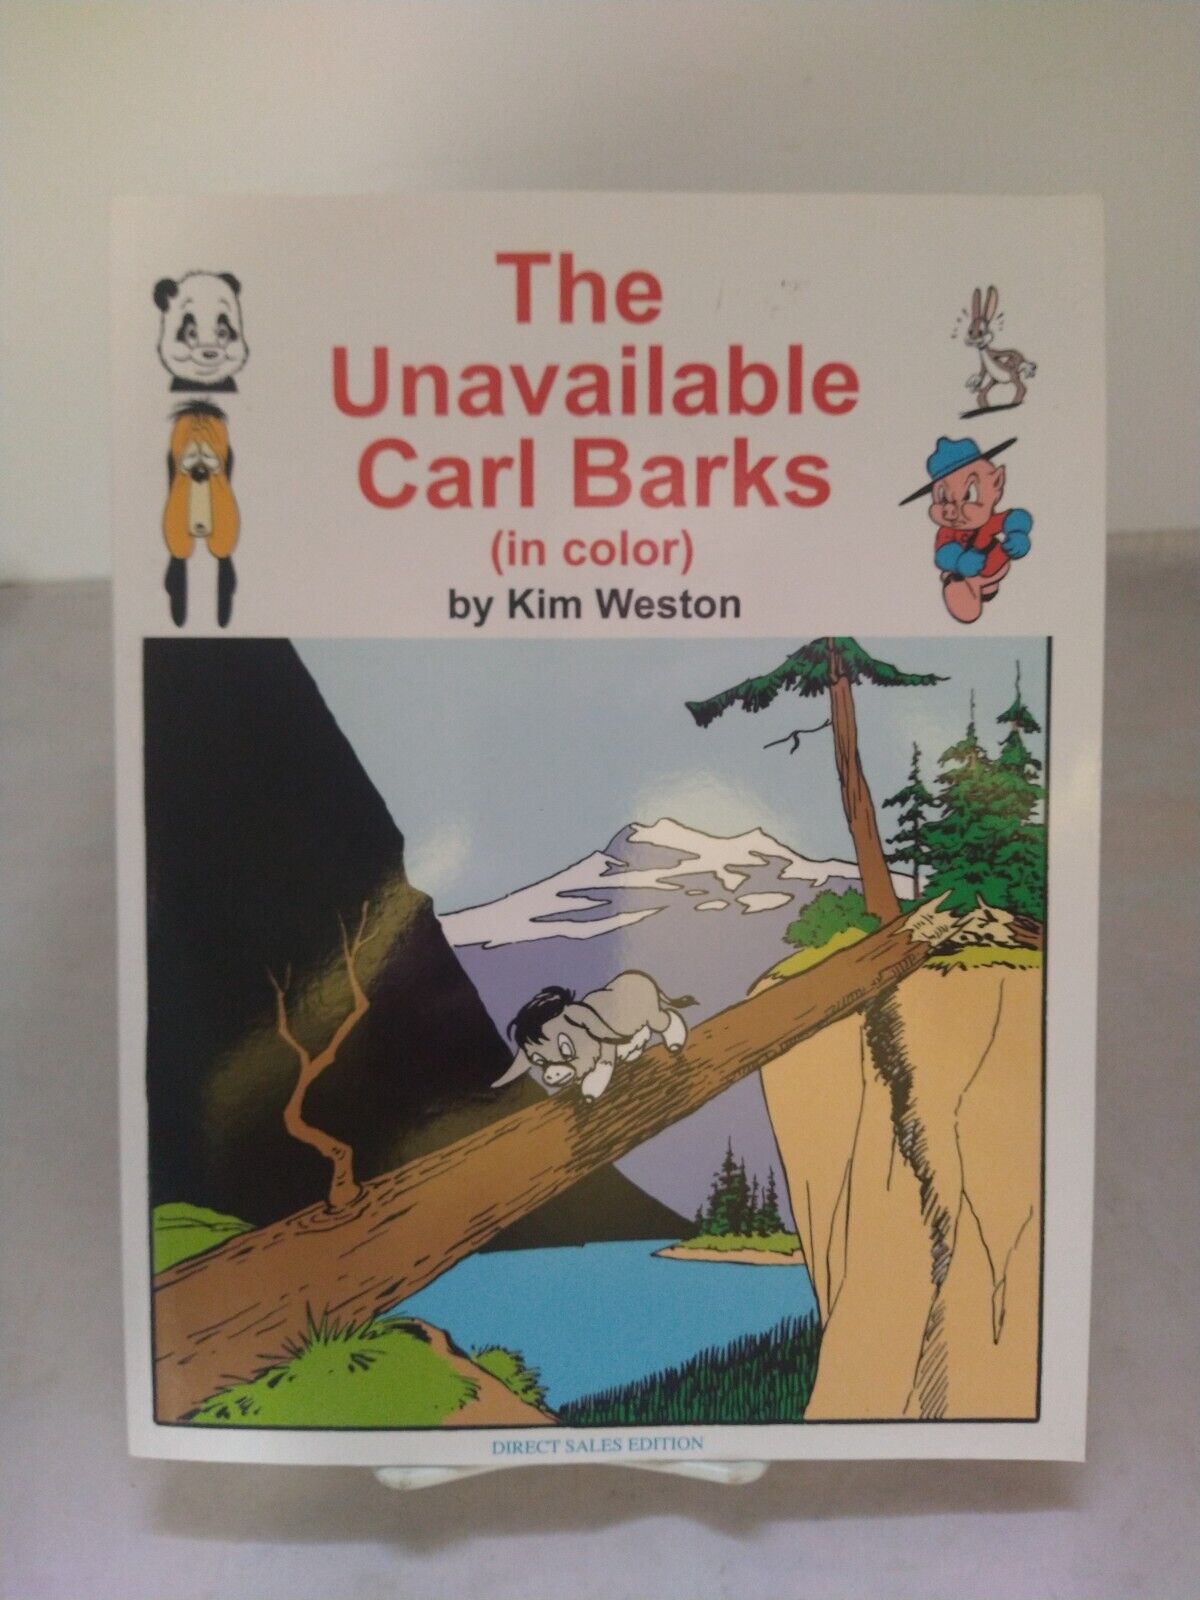 The Unavailable Carl Barks (in color) Paperback Kim Weston Direct Sales Edition